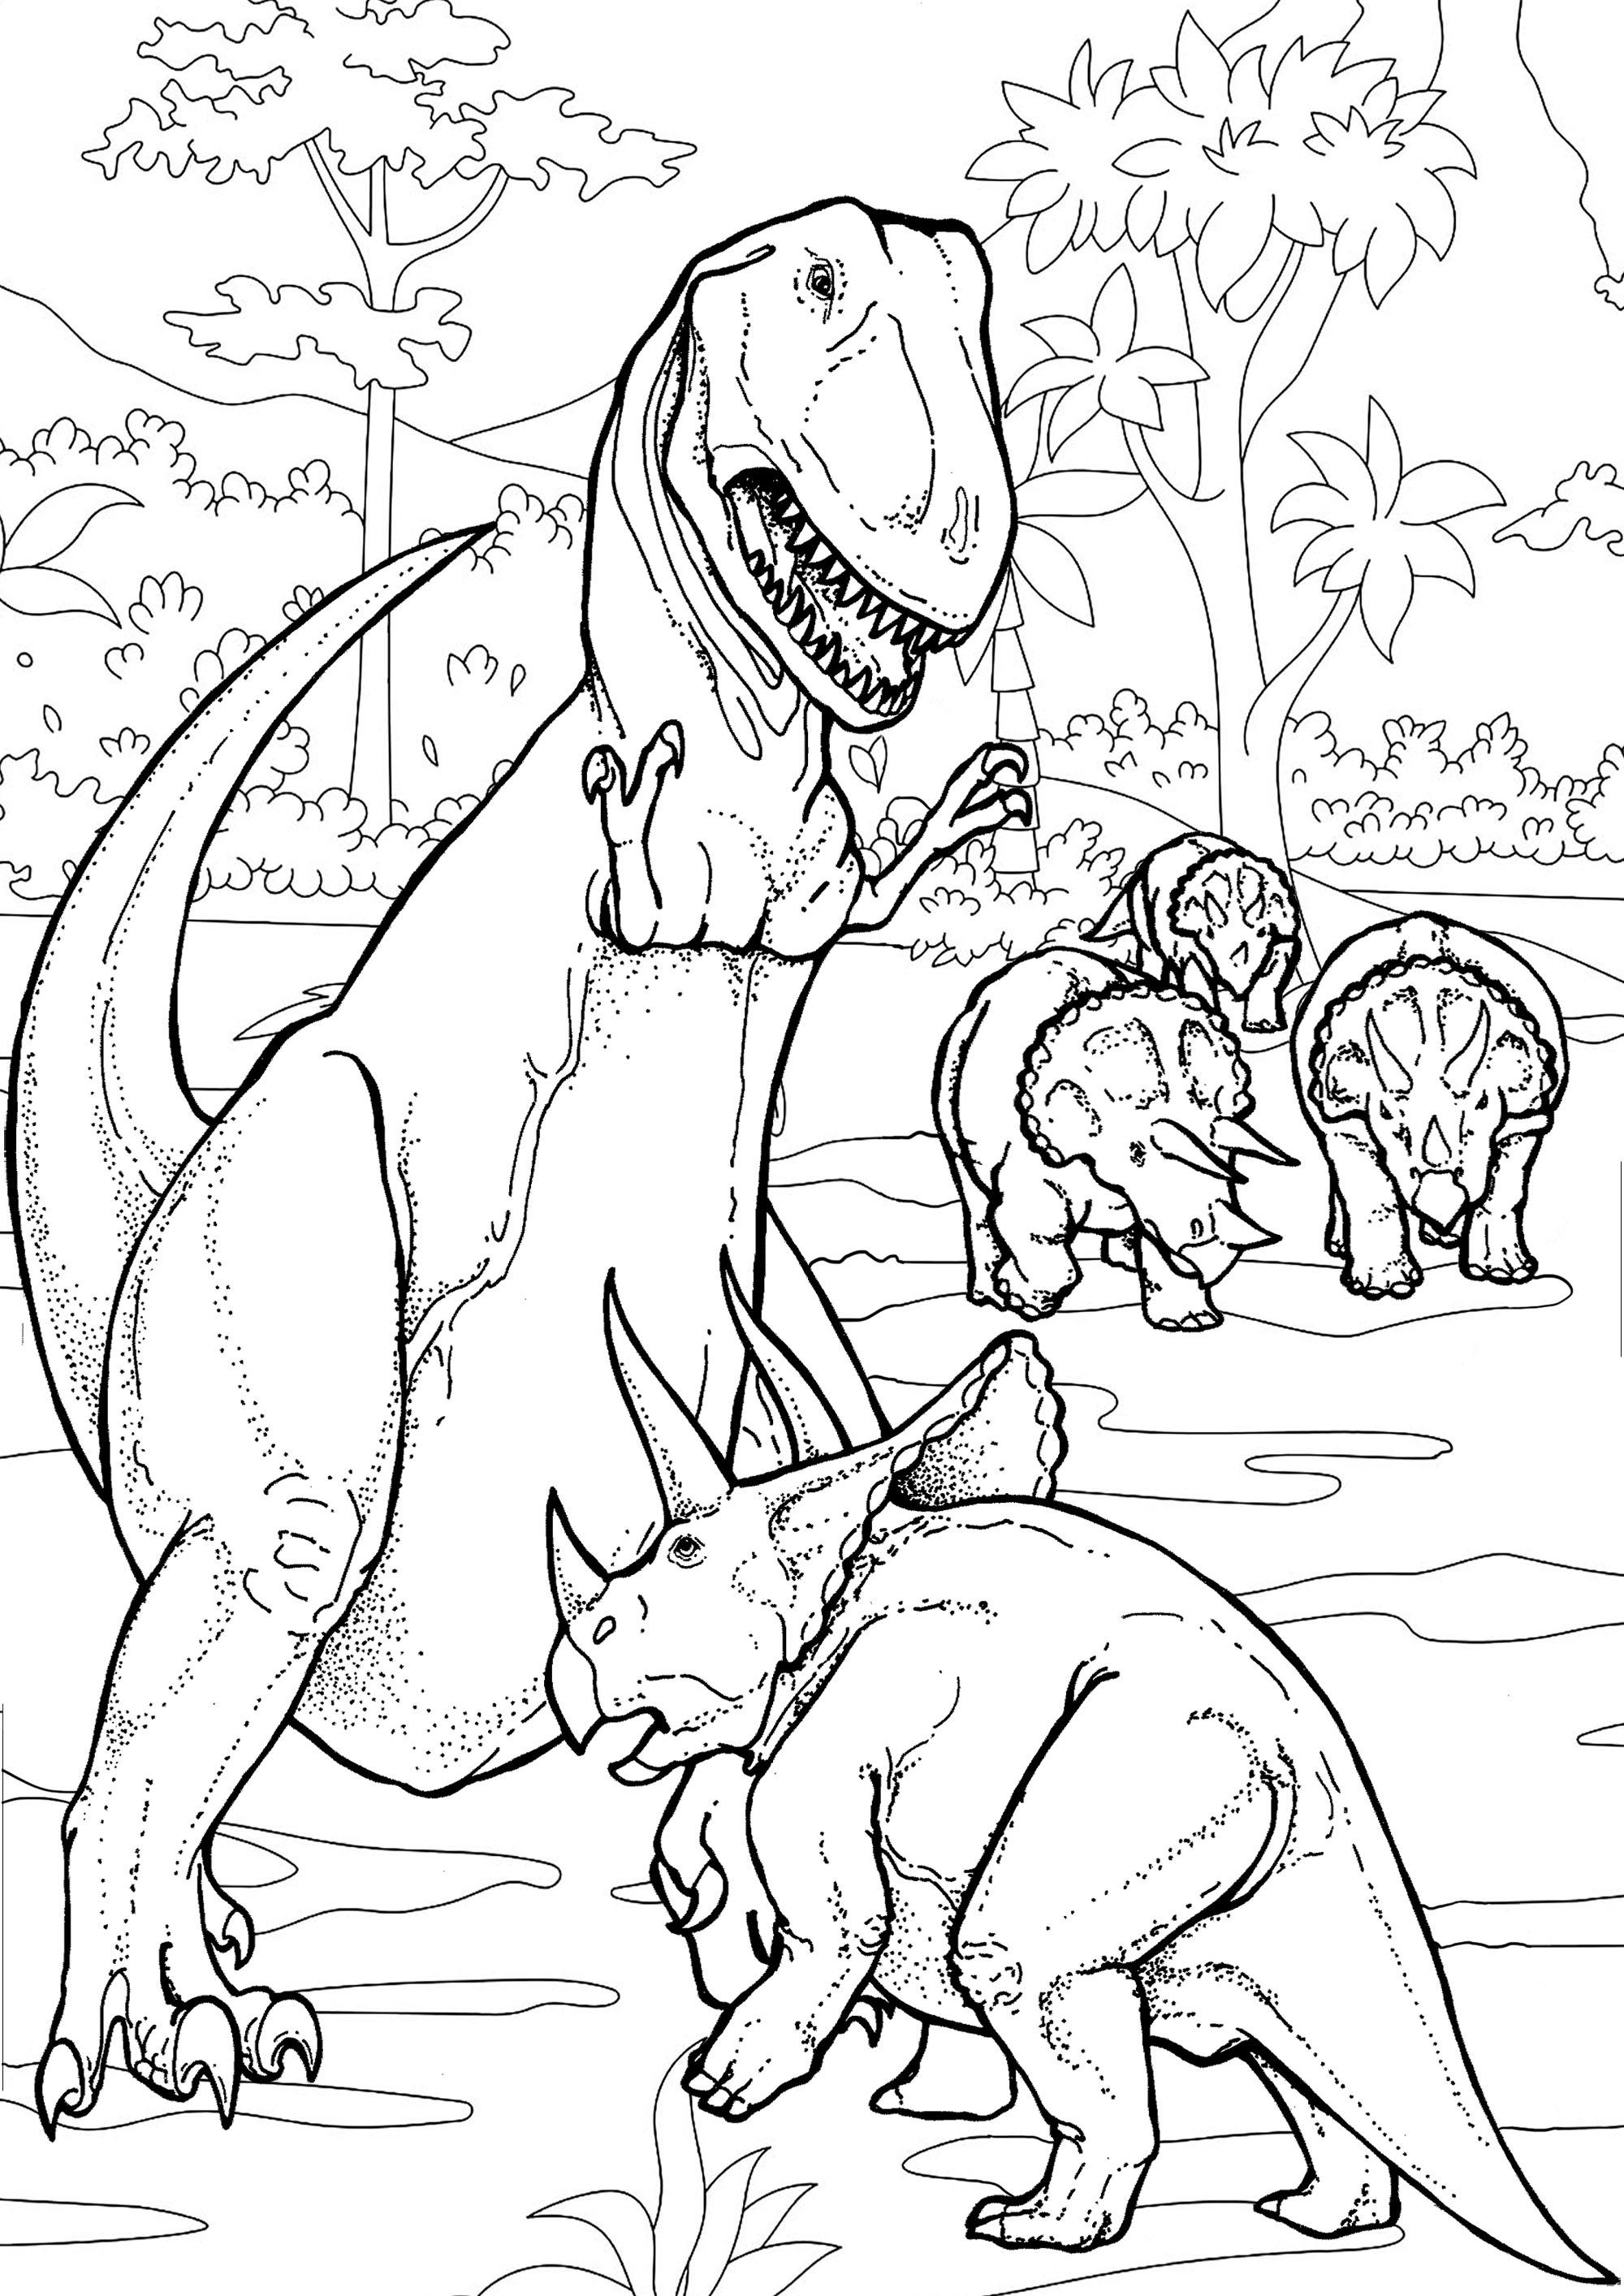 Dinosaurs Battle - Dinosaurs Adult Coloring Pages